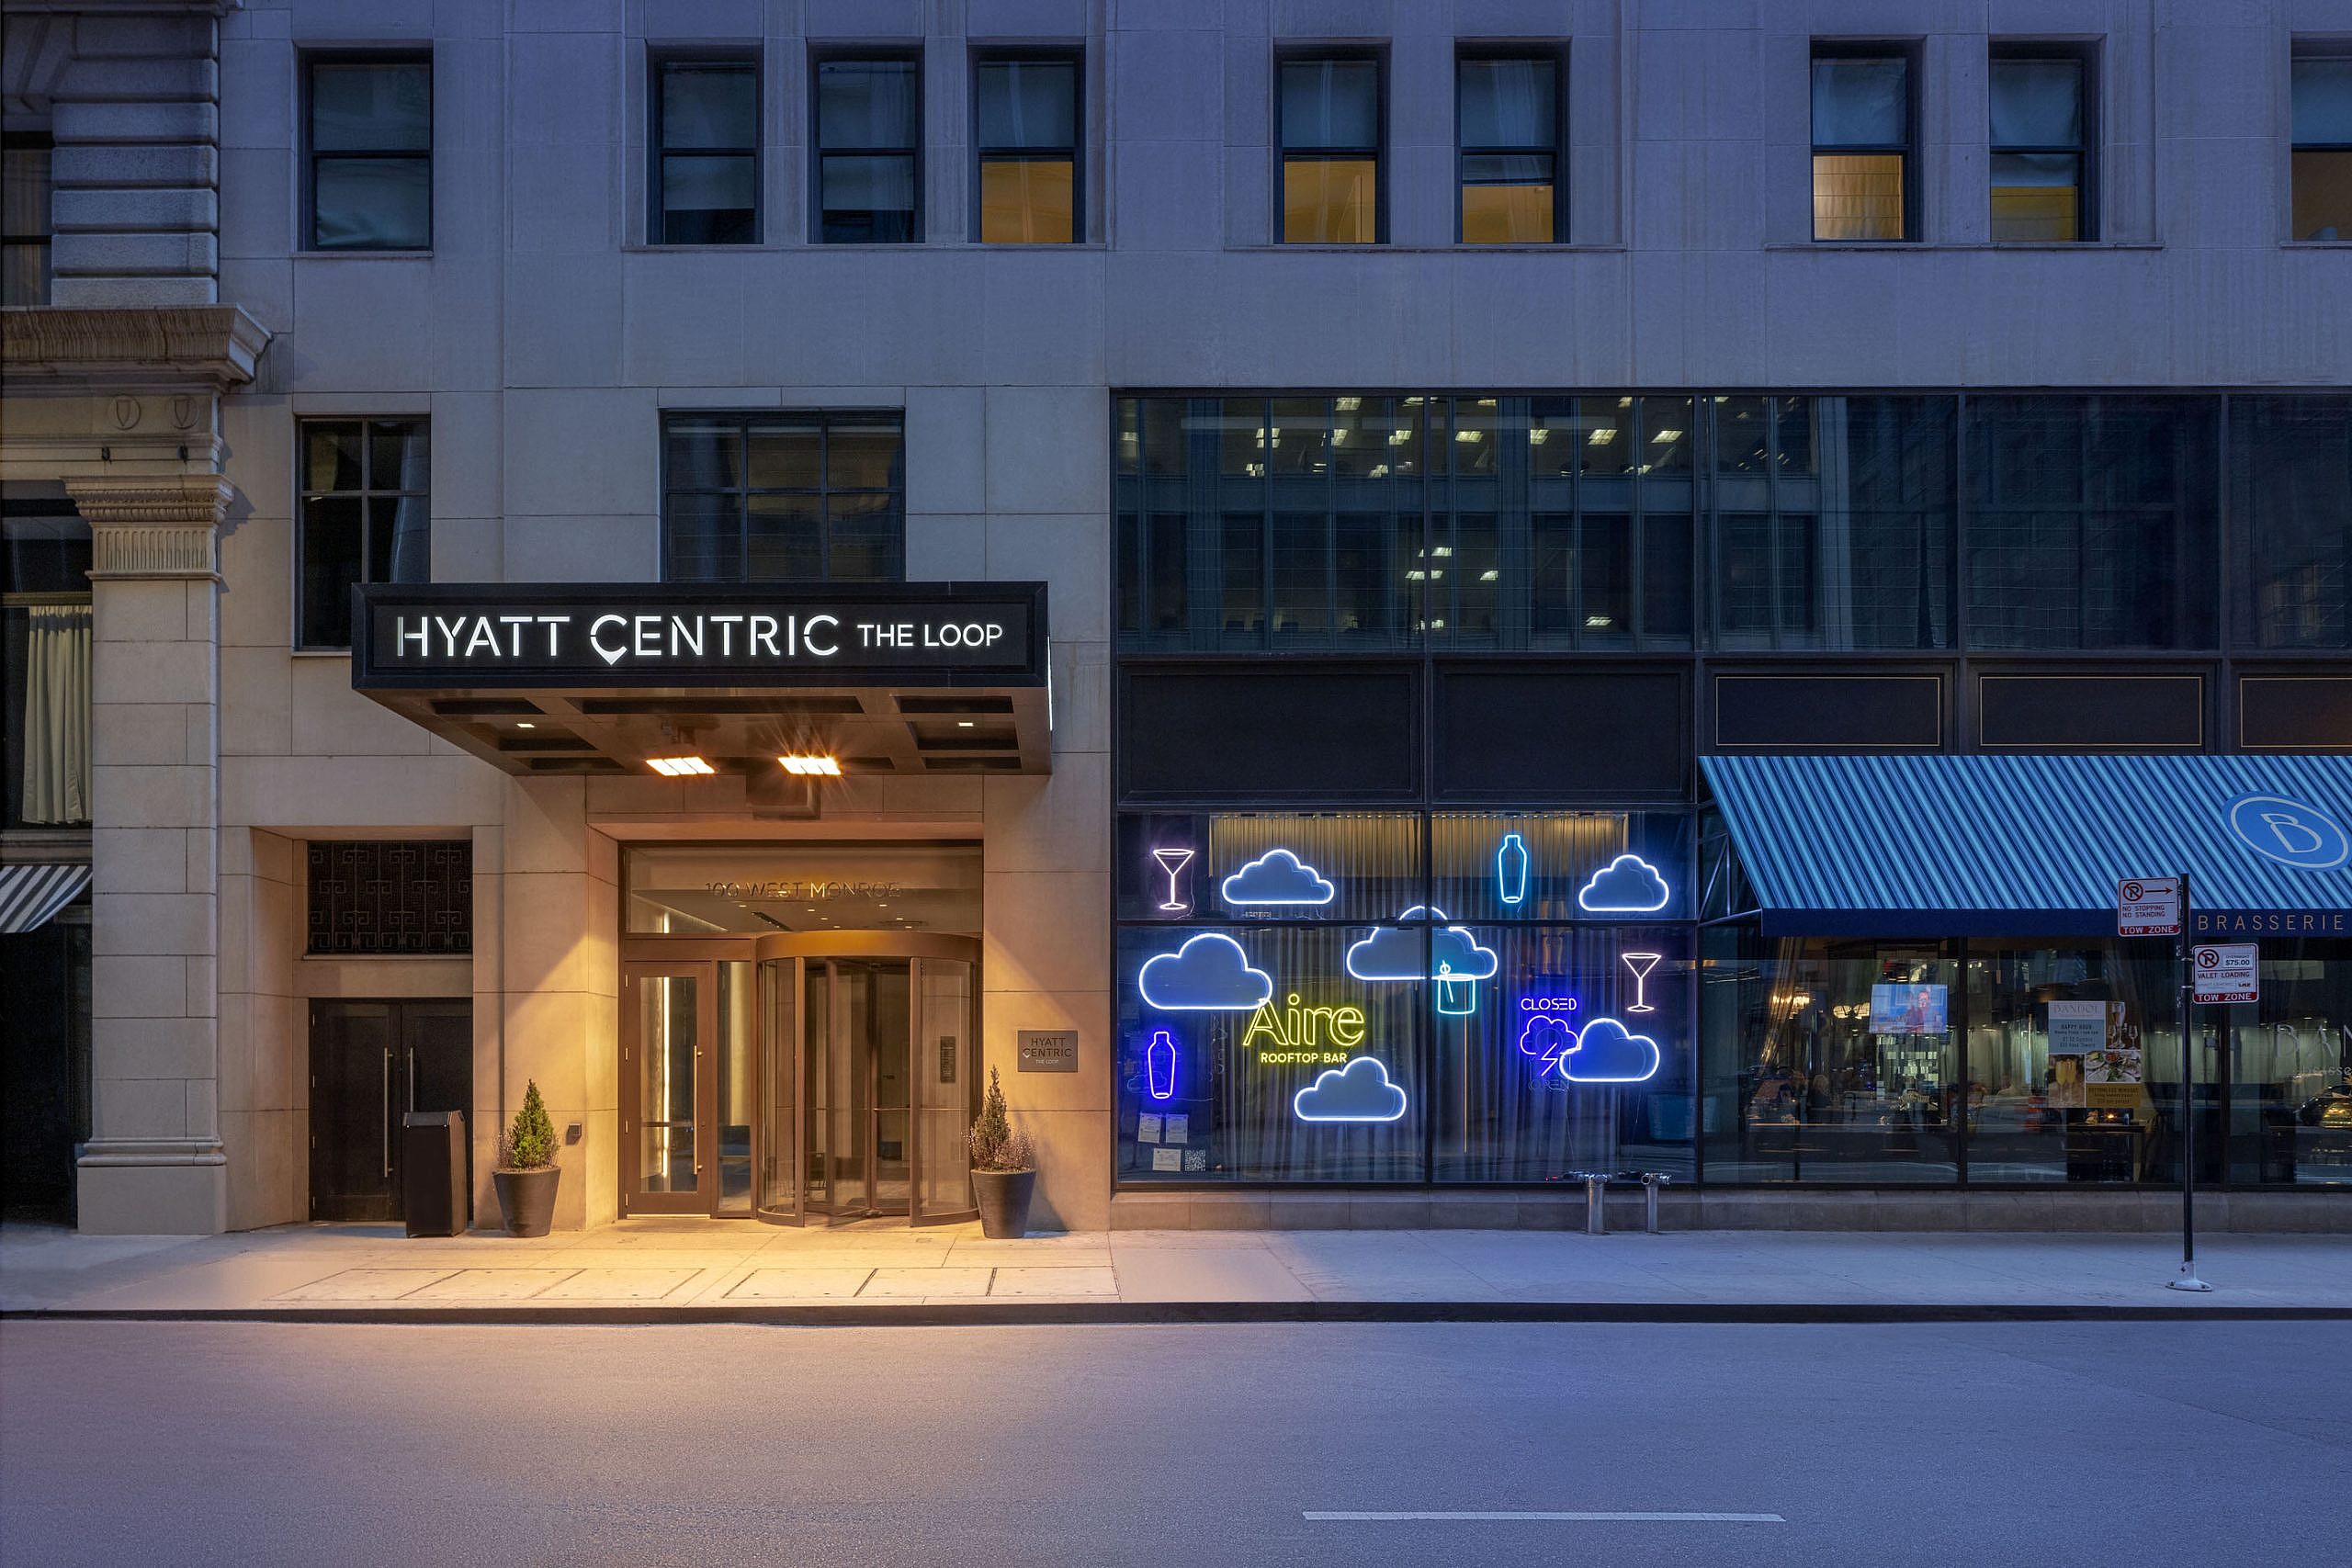 The entrance to the Hyatt Centric The Loop Chicago